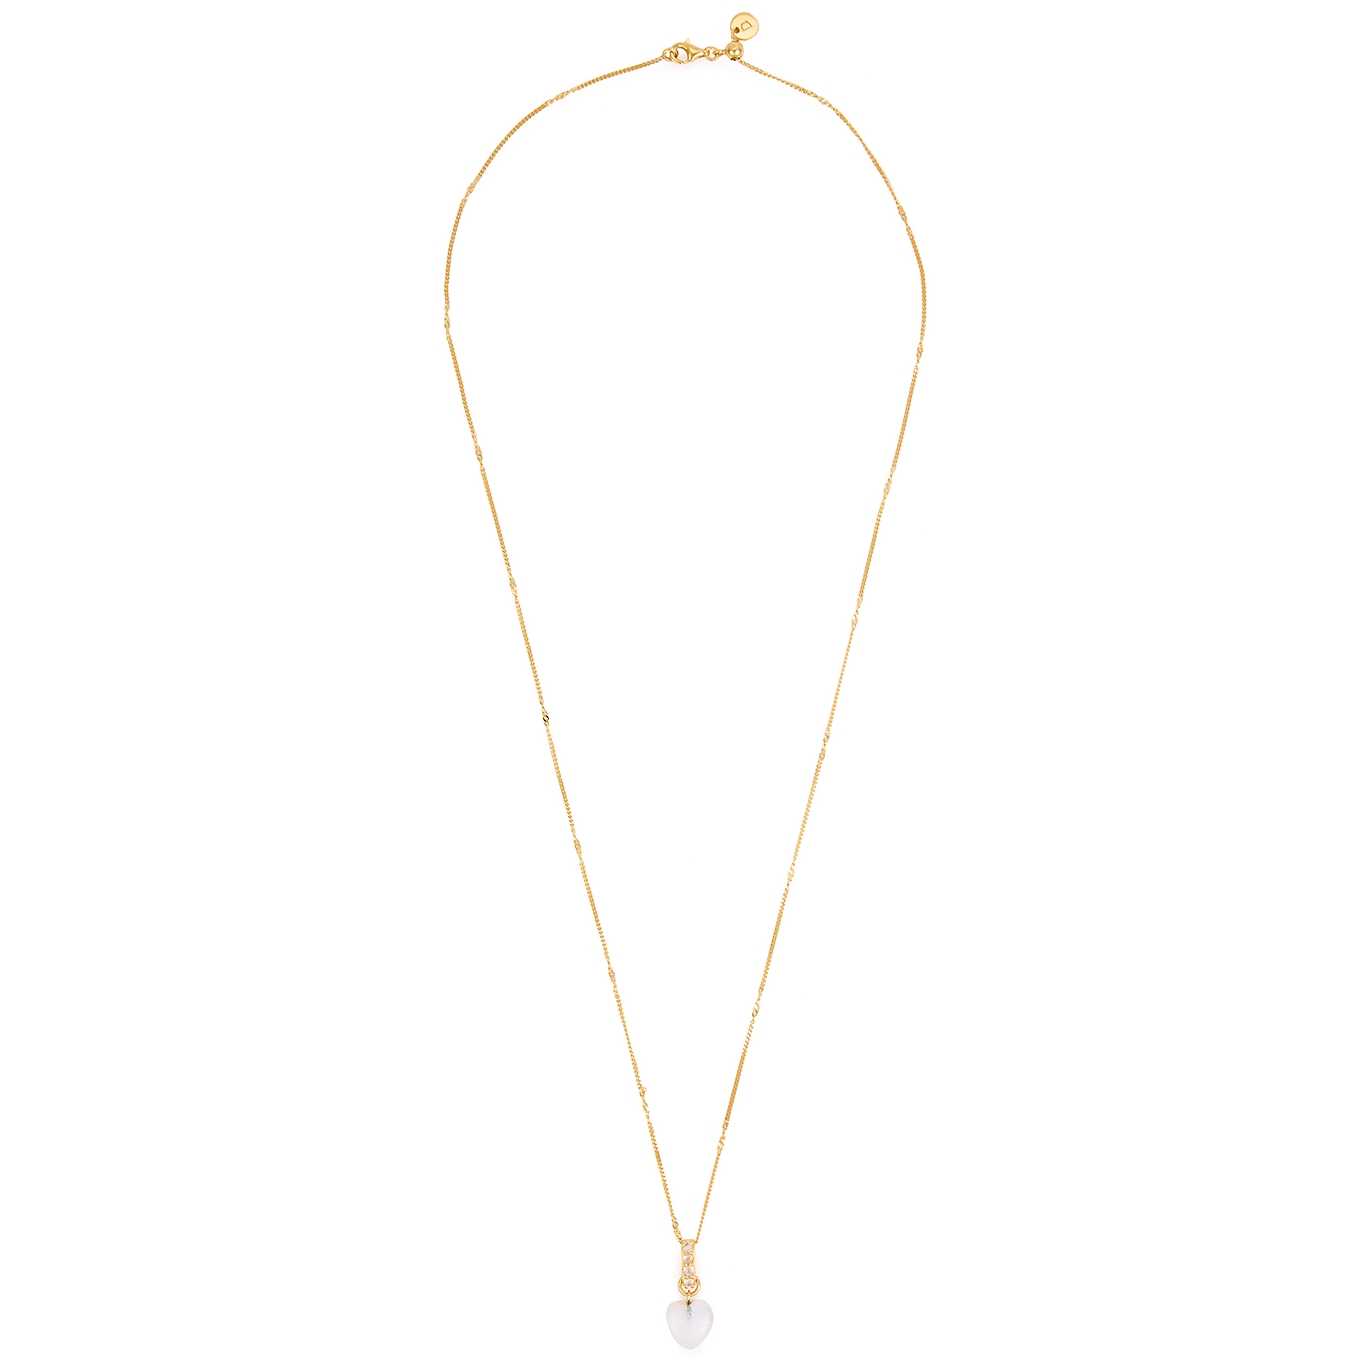 Daisy London Beloved Moonstone Heart 18kt Gold-plated Necklace